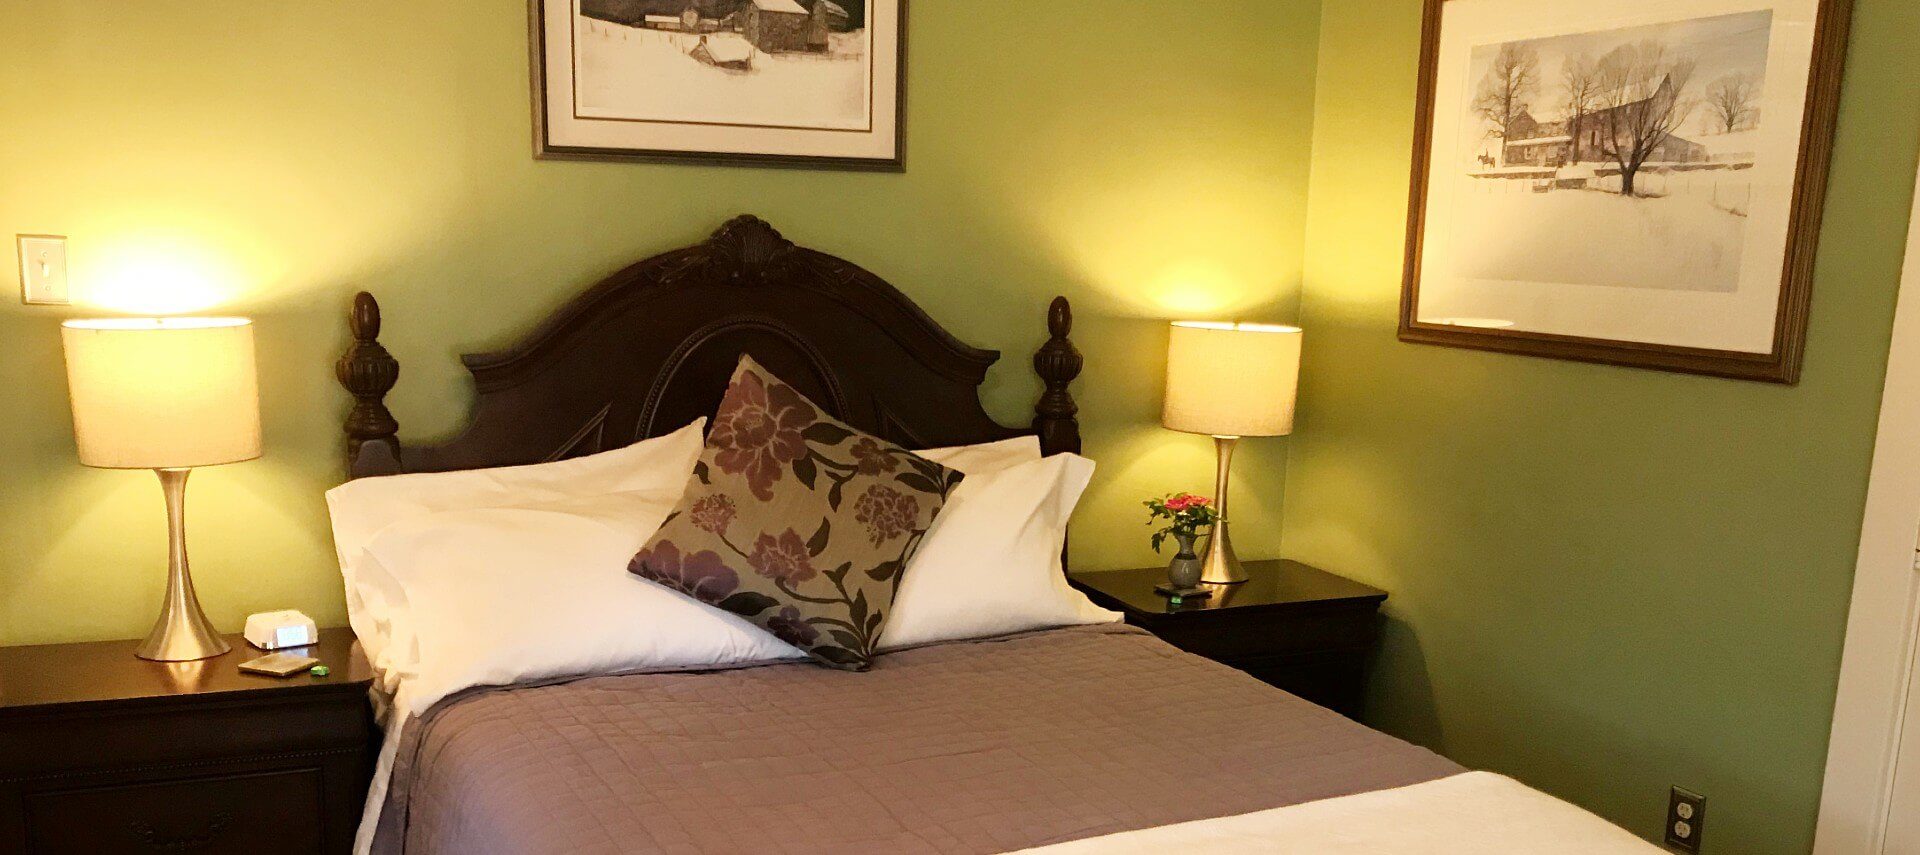 Elegant guest room with dark brown queen bed, green walls and two side tables with lamps